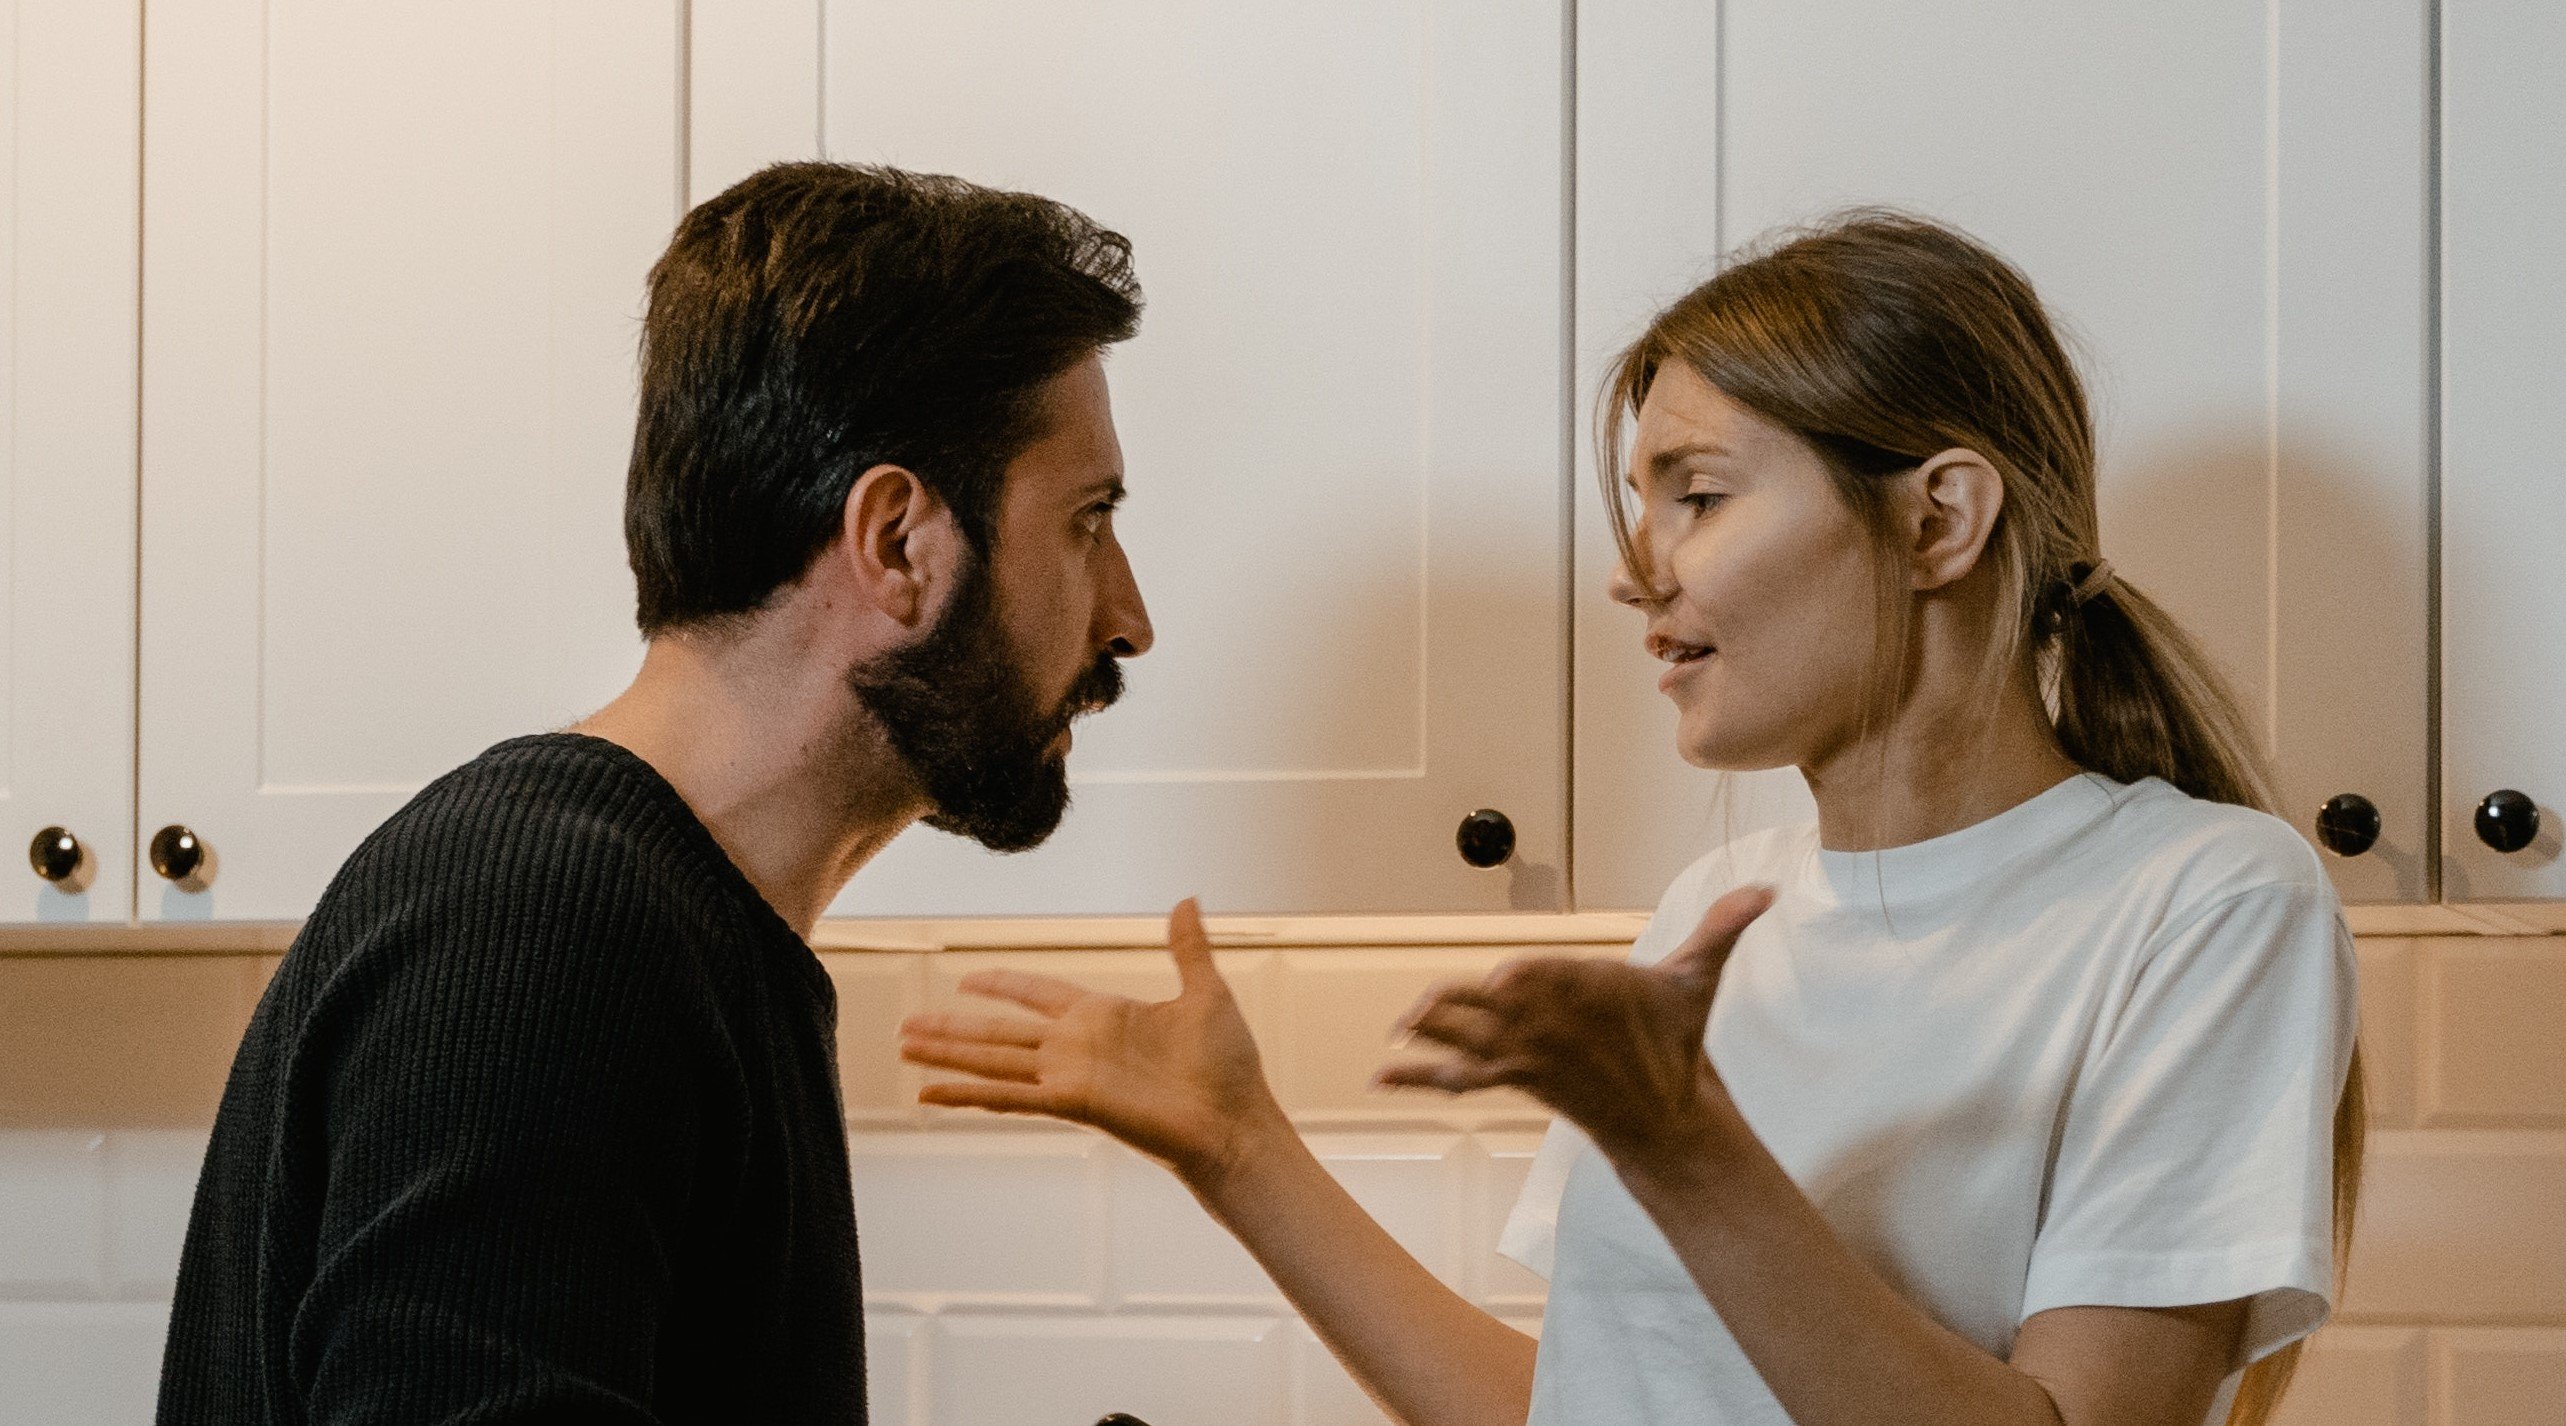 OP confronts his wife |  Photo: Pexels